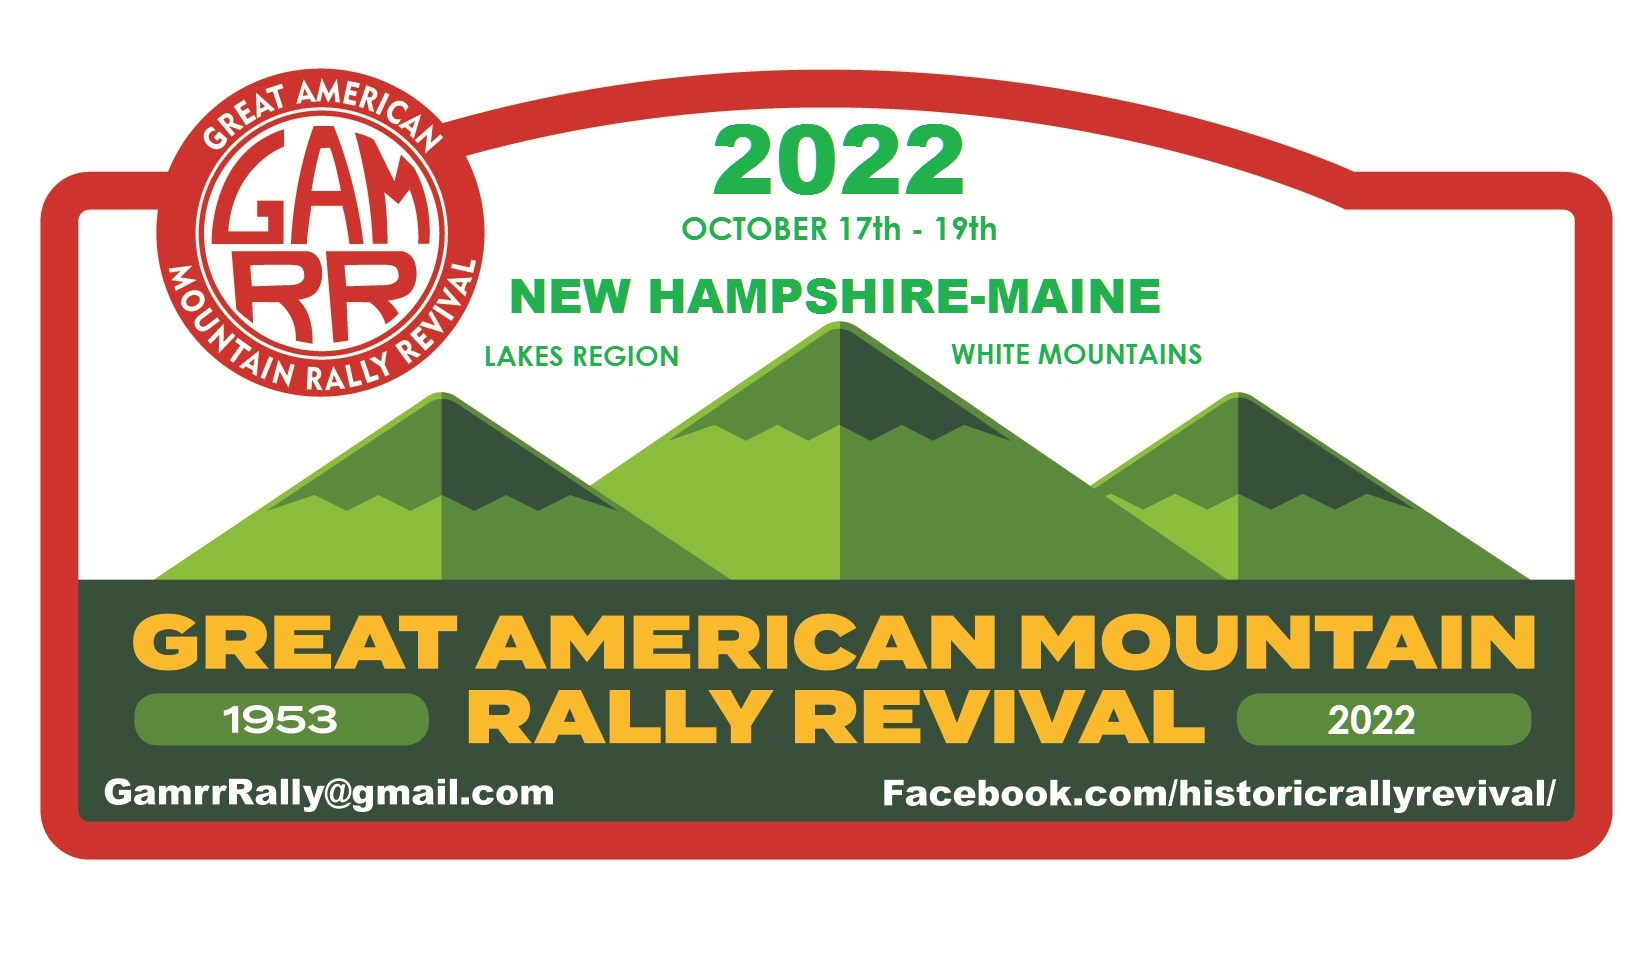 GREAT AMERICAN MOUNTAIN RALLY REVIVAL